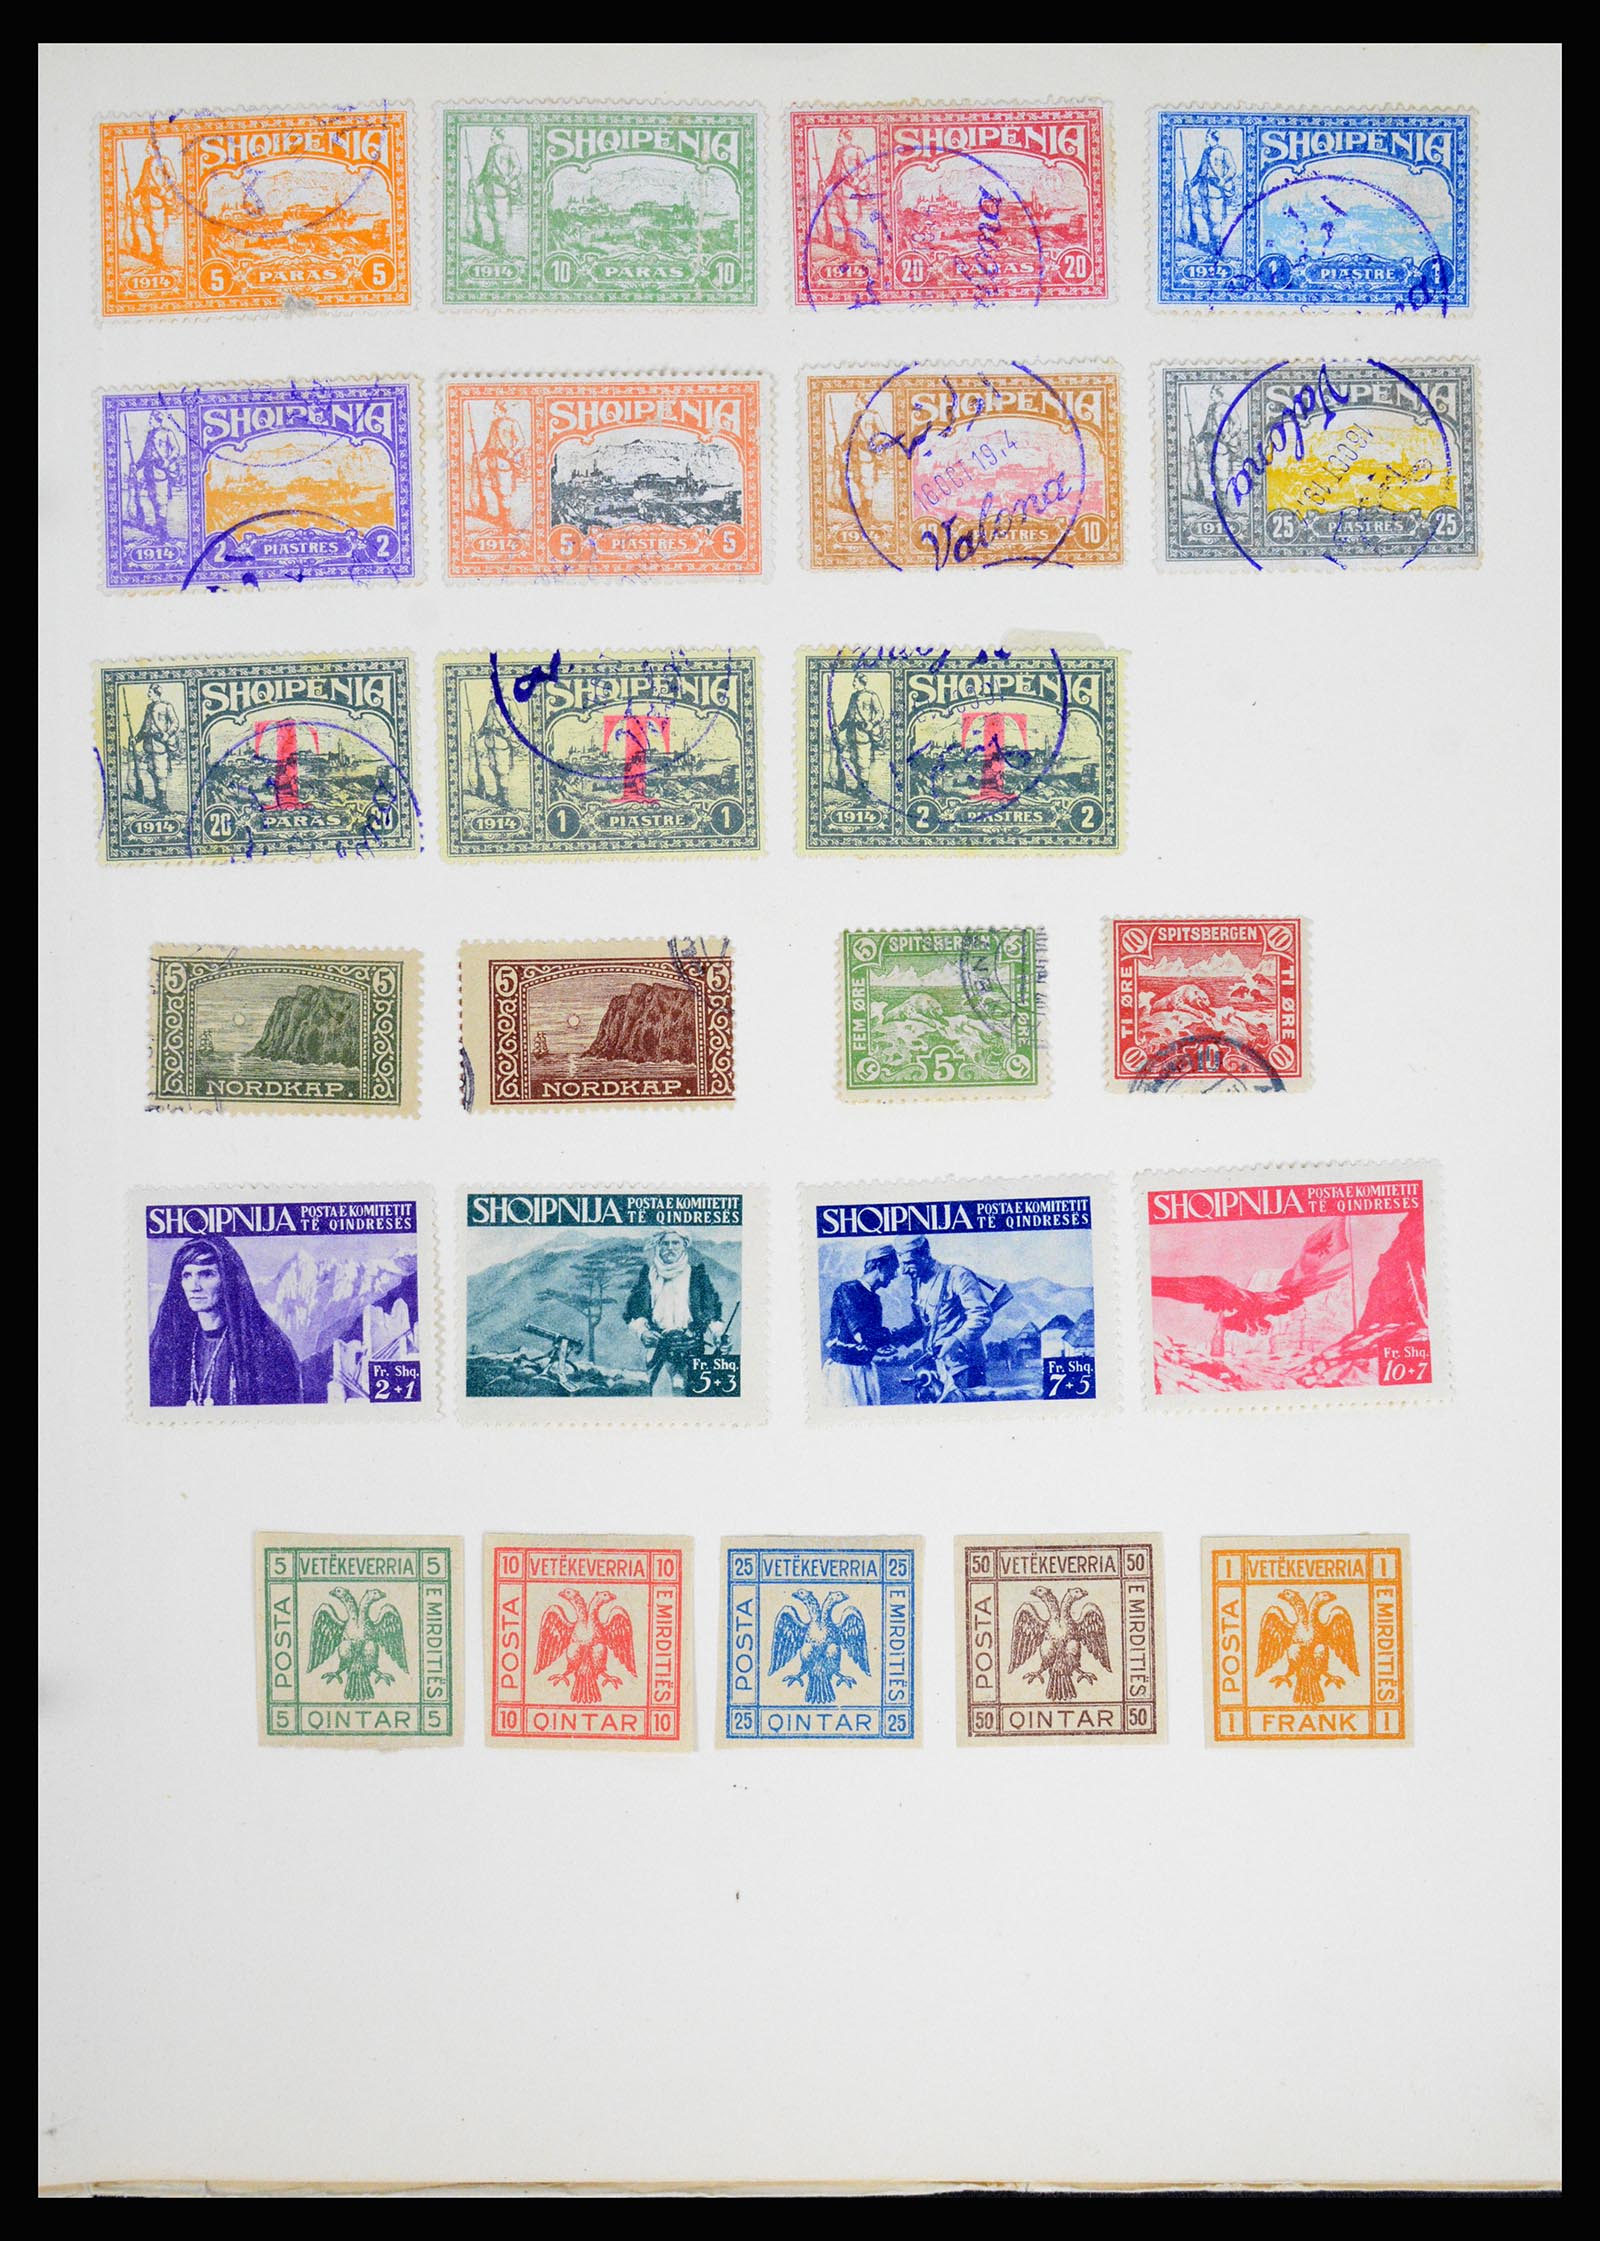 36994 010 - Stamp collection 36994 World forgeries 1843-1940.